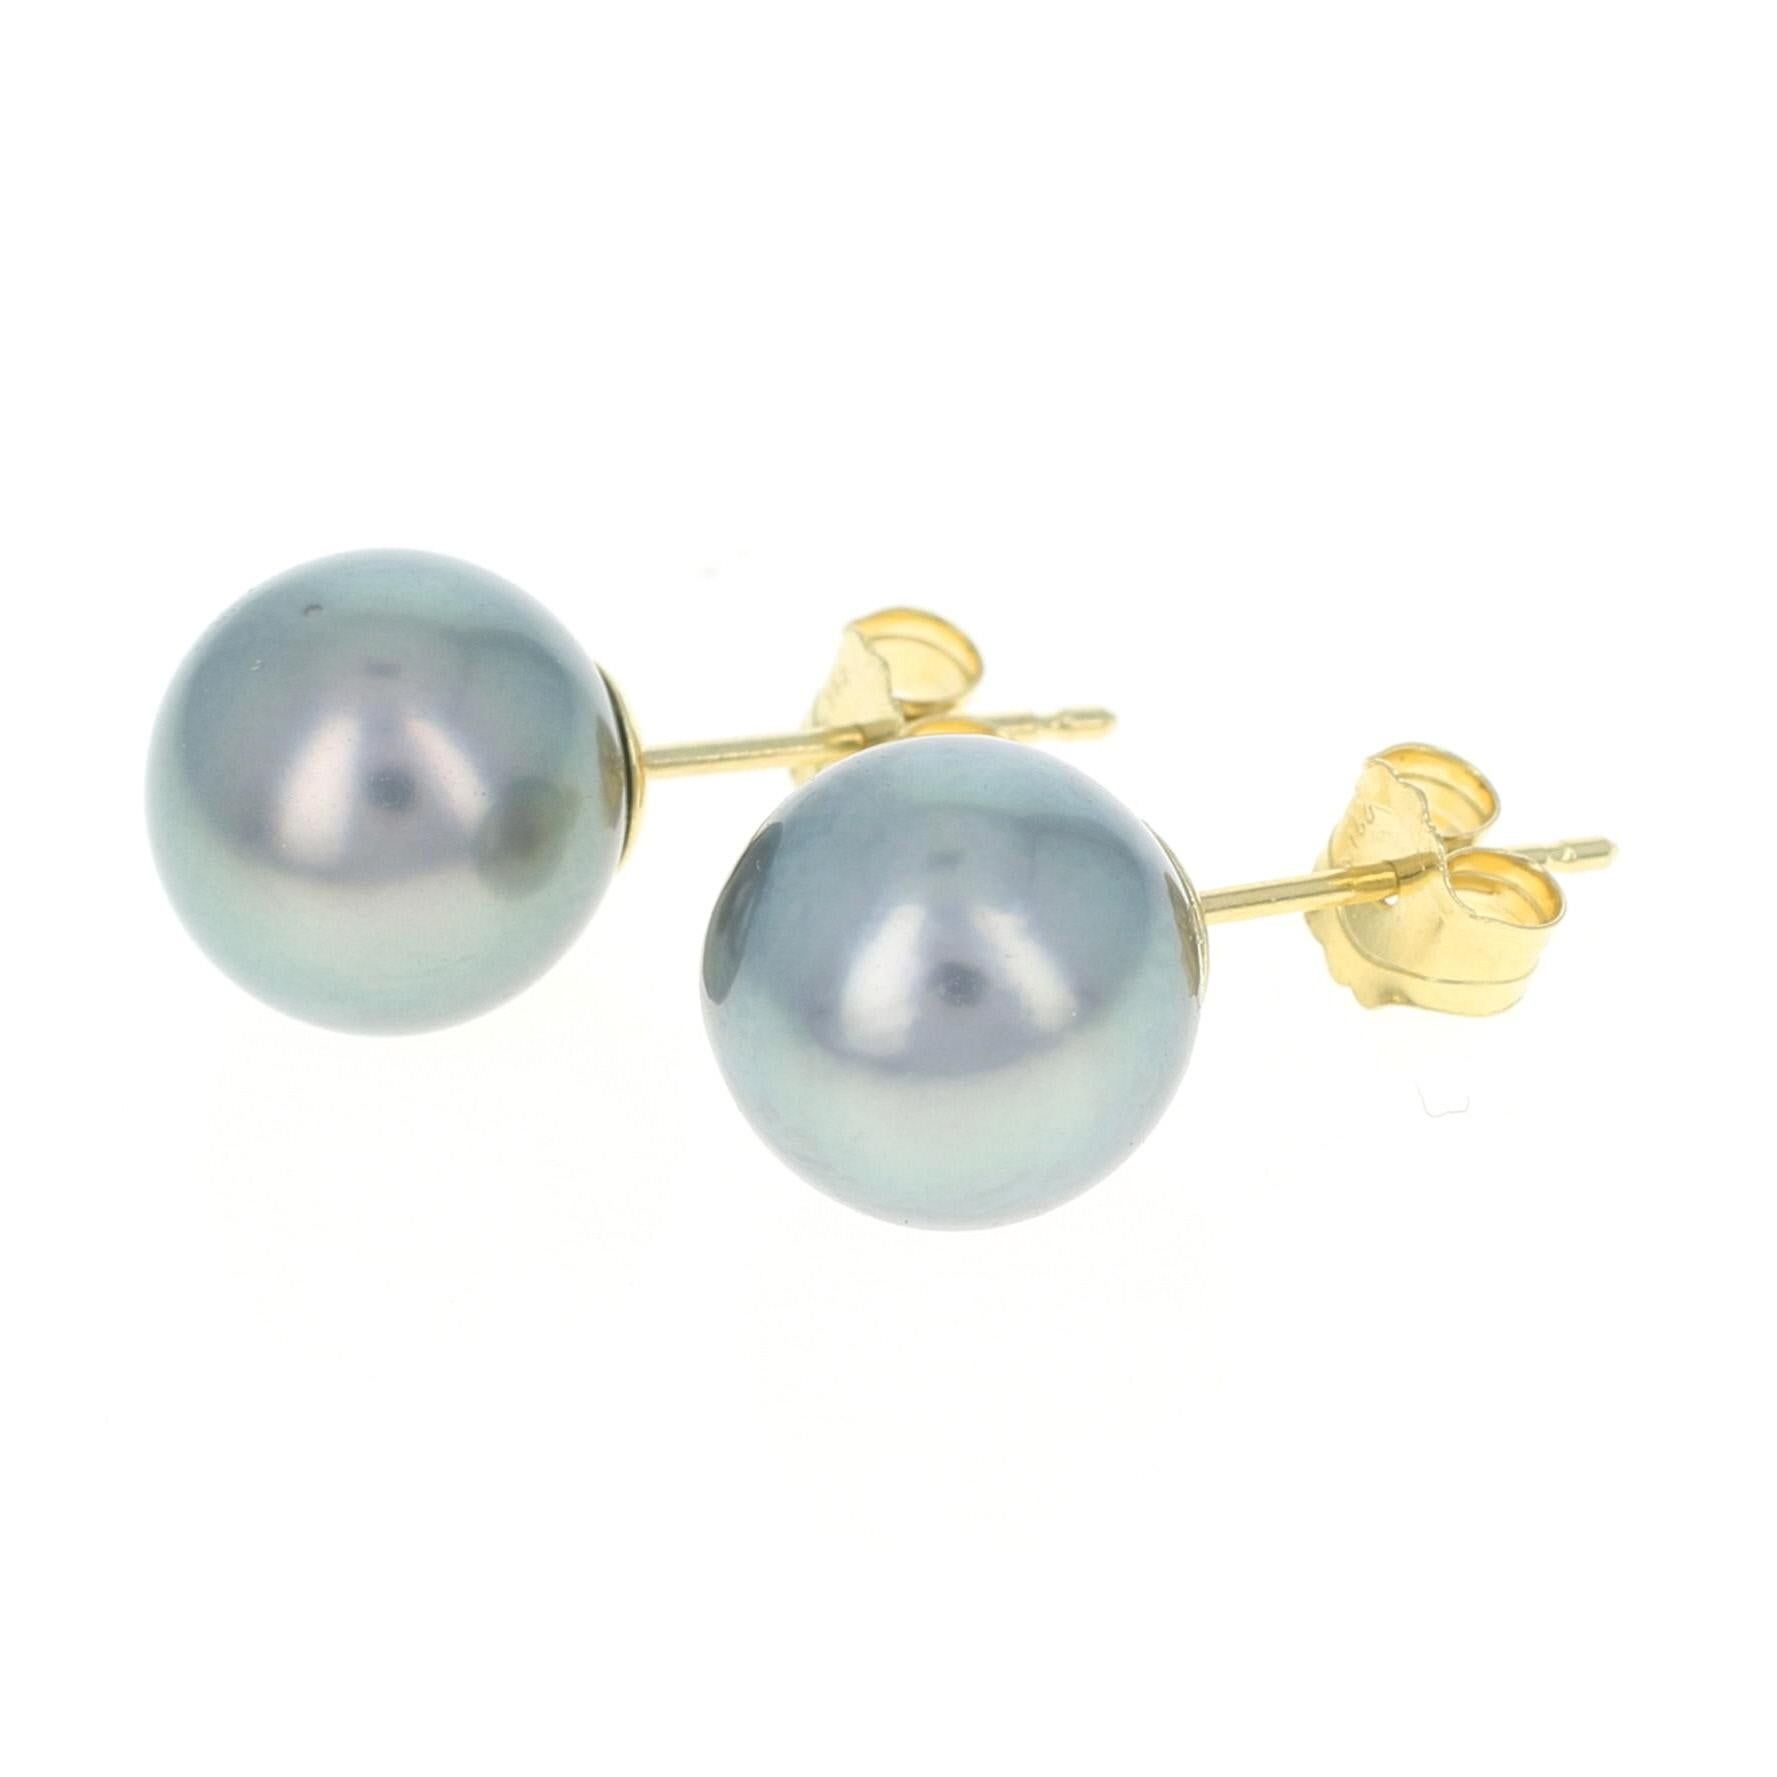 Step out in style wearing this timeless pair of pearl earrings! Composed of glowing 18k yellow gold and fashioned in a sophisticated stud style, these earrings showcase genuine Tahitian pearls which have a charcoal gray tone that is just simply